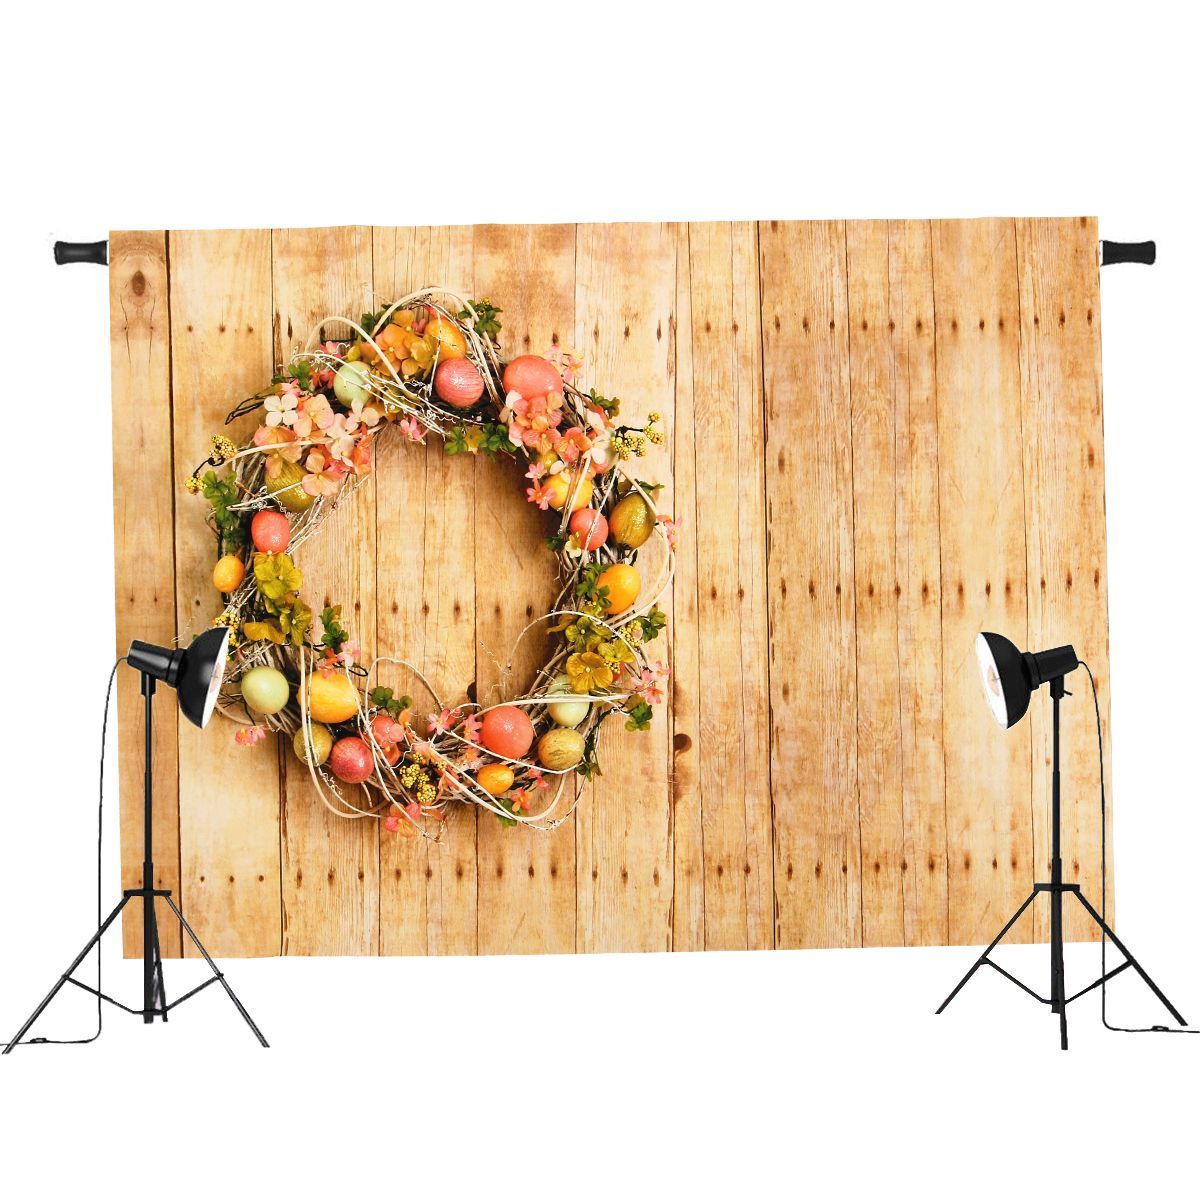 7x5ft5x3ft-Easter-Egg-Wood-Board-Thin-Vinyl-Photography-Backdrop-Background-Studio-Photo-Prop-1314802